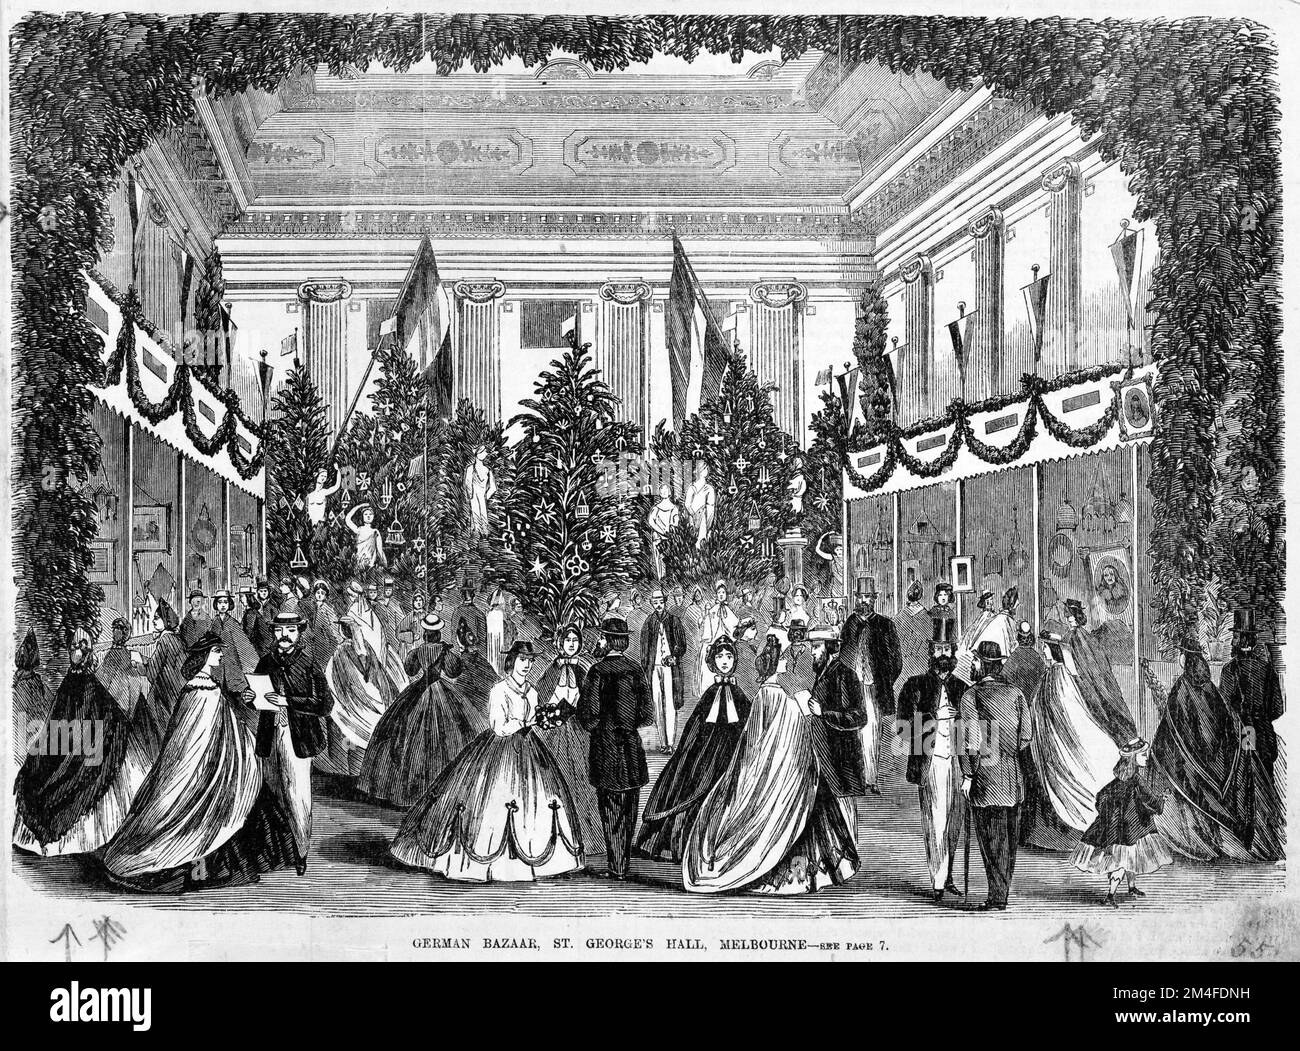 German Bazaar, St. George's Hall, Melbourne. Shows men and women inside hall. Paintings and goods dislayed around walls. 1865. Stock Photo